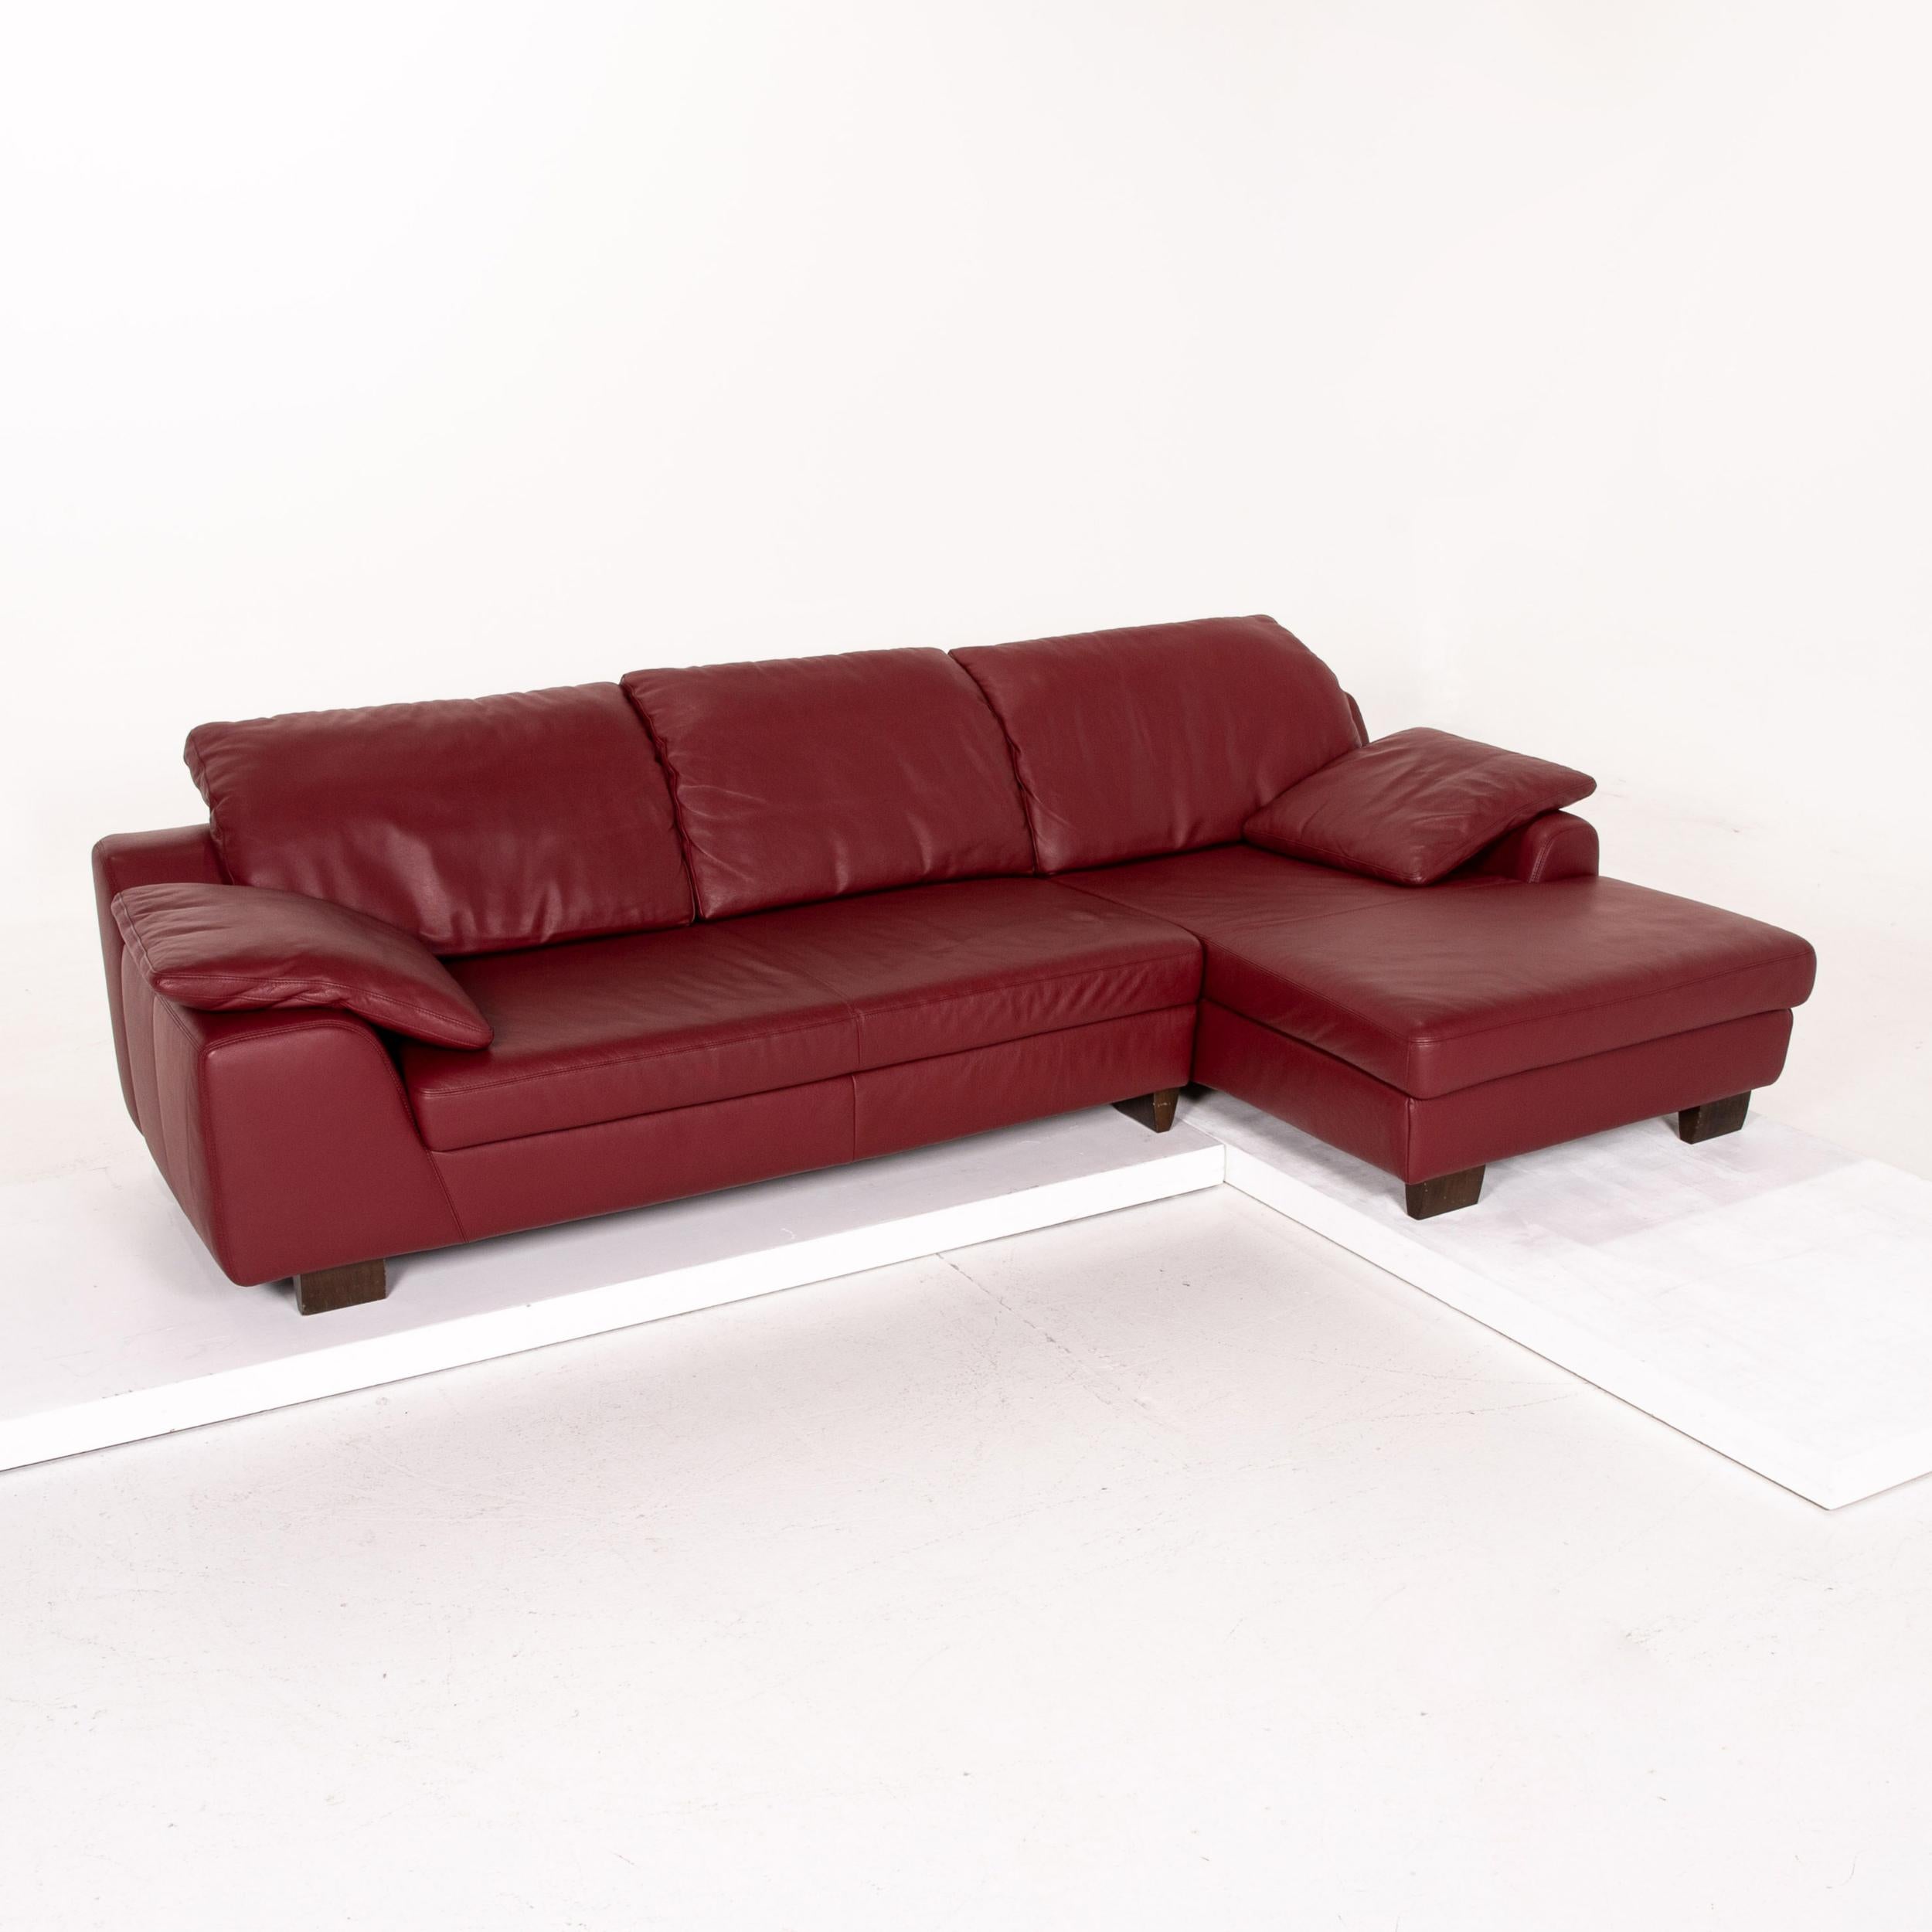 Musterring Leather Corner Sofa Red Dark Red Sofa Couch For Sale 1